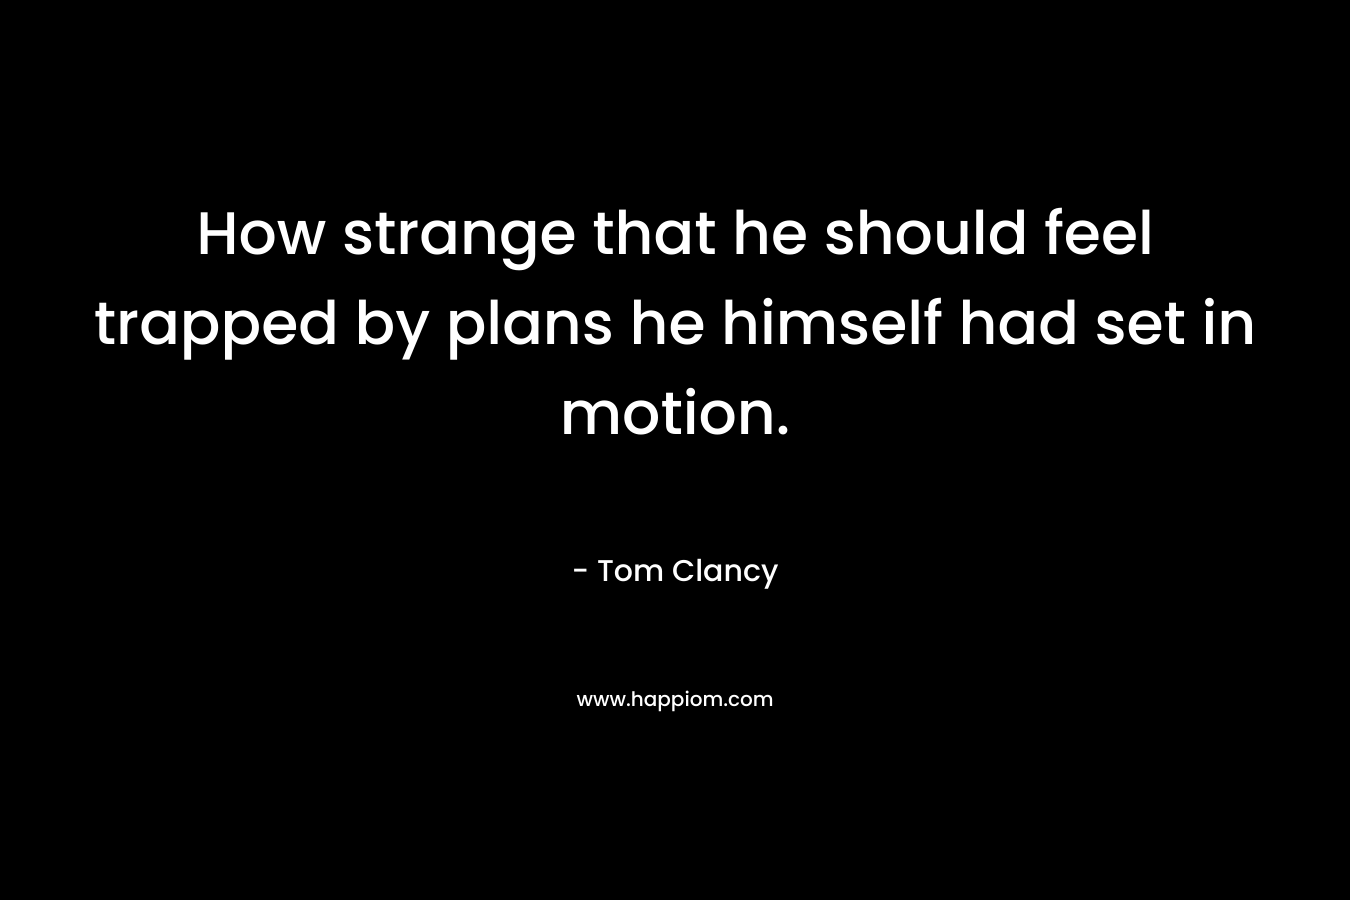 How strange that he should feel trapped by plans he himself had set in motion. – Tom Clancy